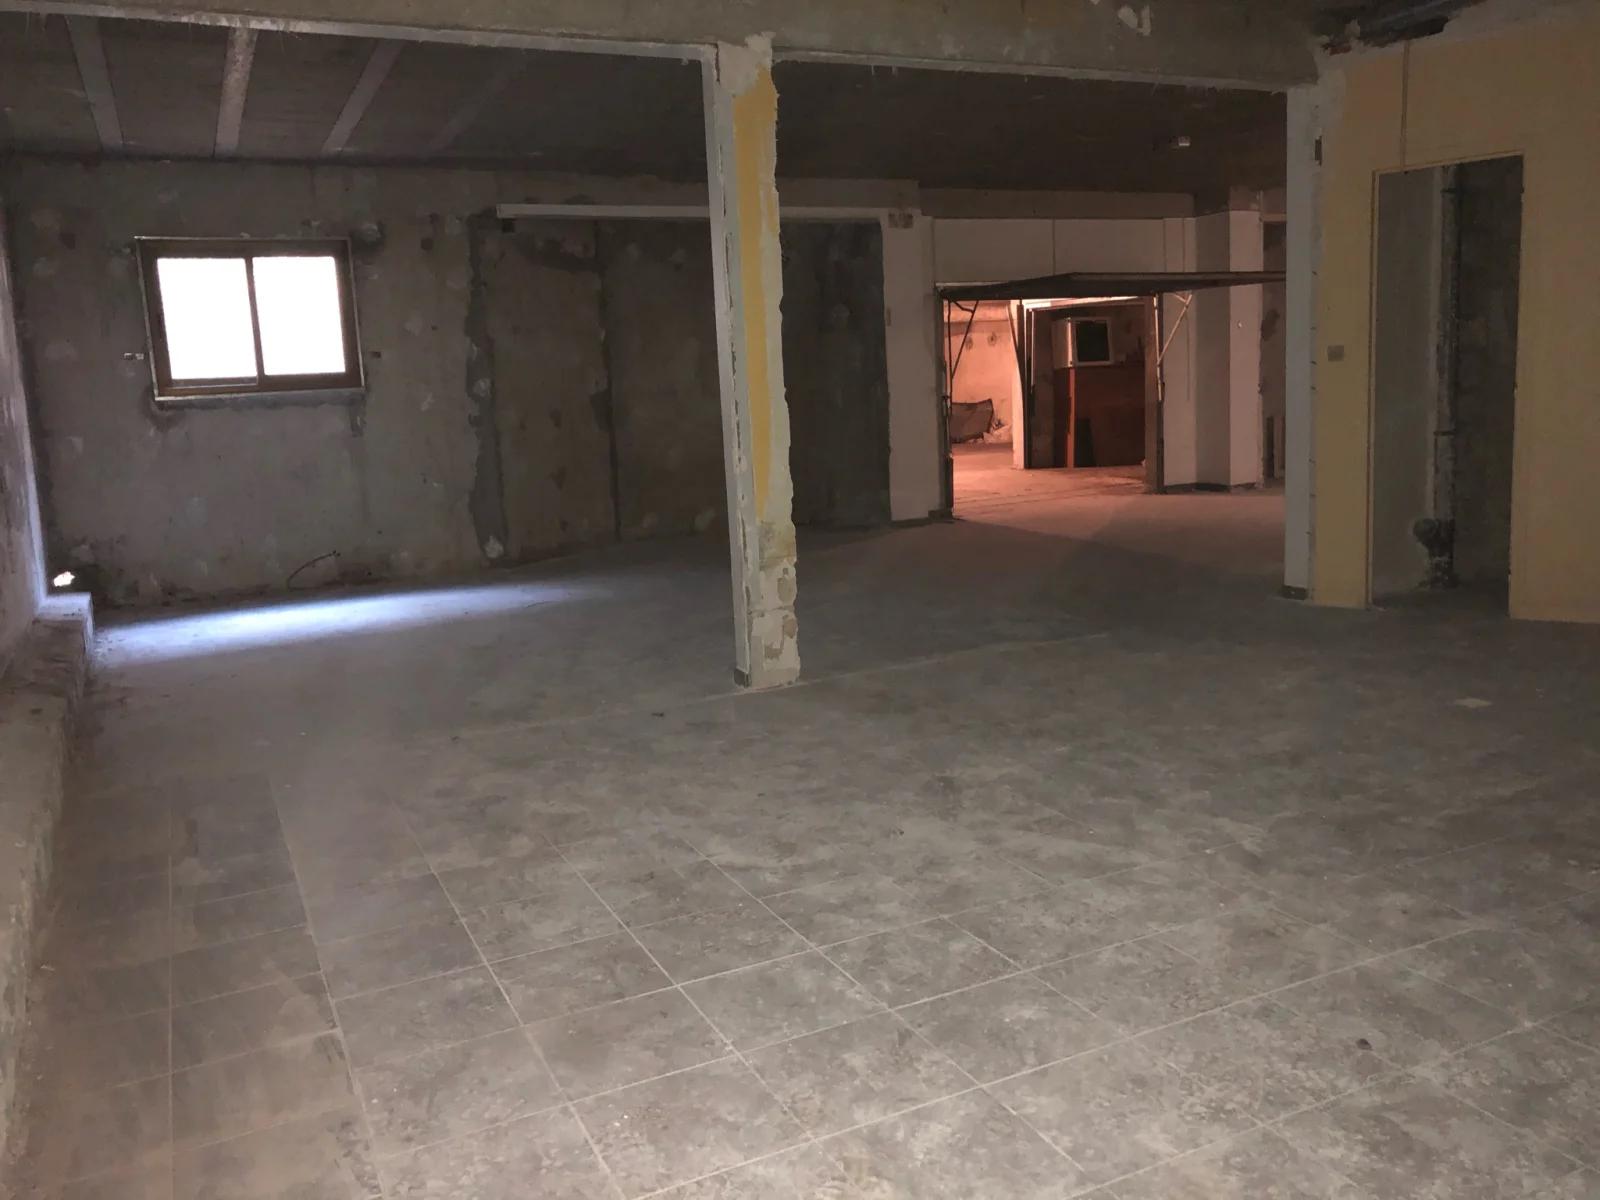 Meeting room in 400m² - building site / unfinished floors - 300 m from RER station - 1